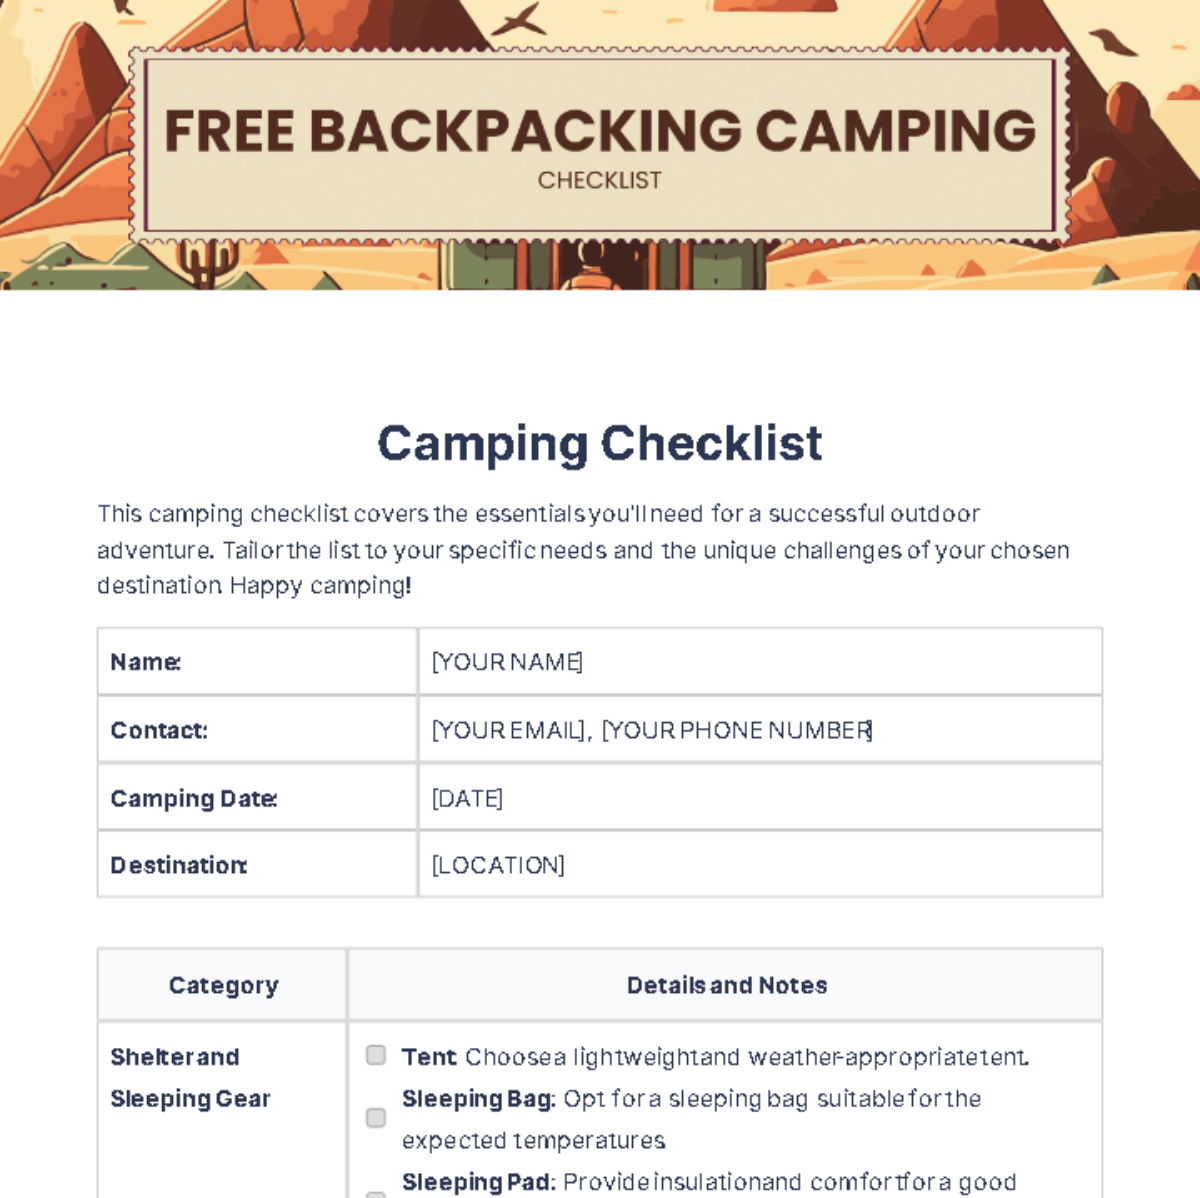 Backpacking Camping Checklist Template